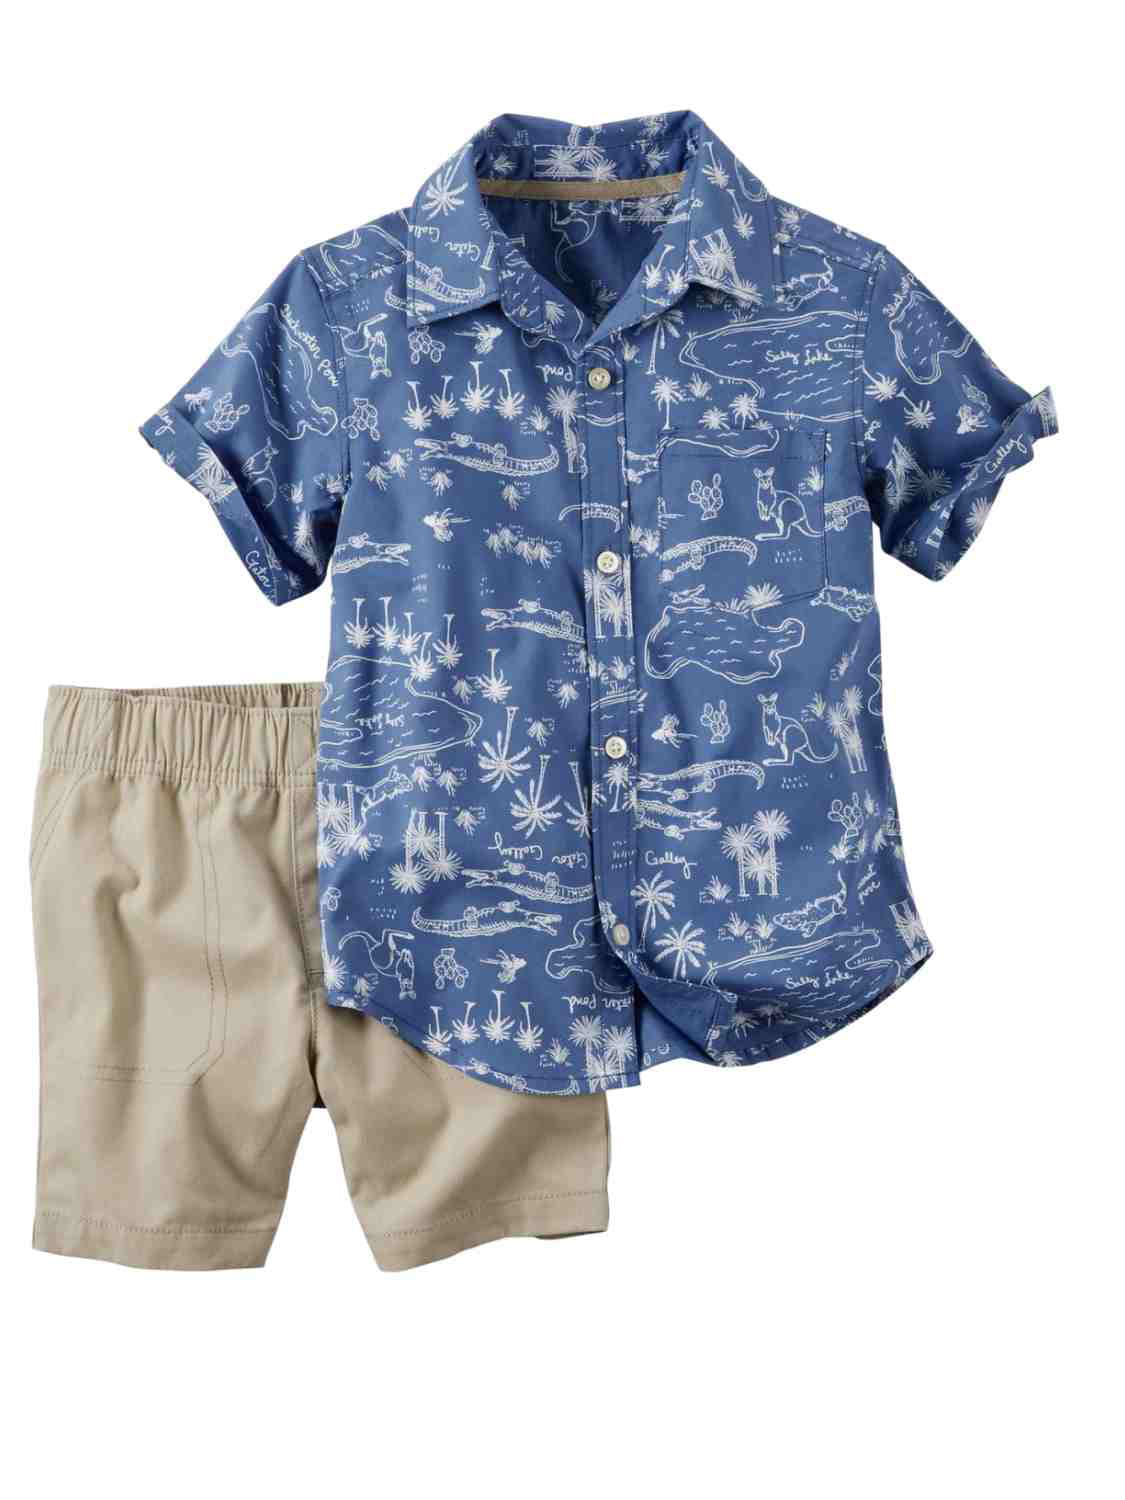 Baby Boy 2-Piece Outfit Shorts Shirts Pants Button Down Shirts 18 Months Carters 